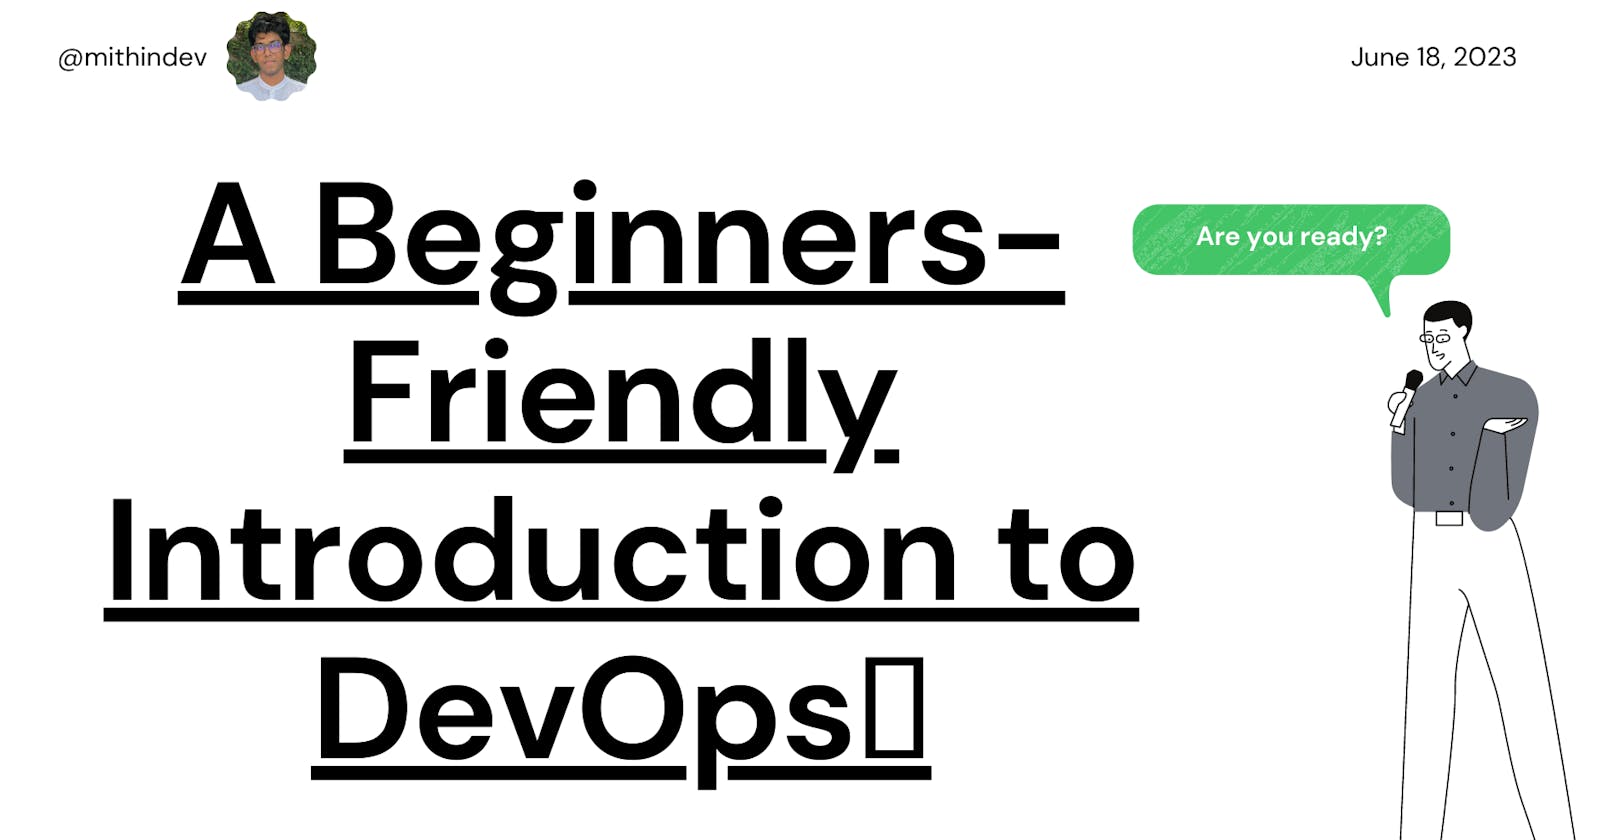 A Beginners-Friendly Introduction to DevOps🐳